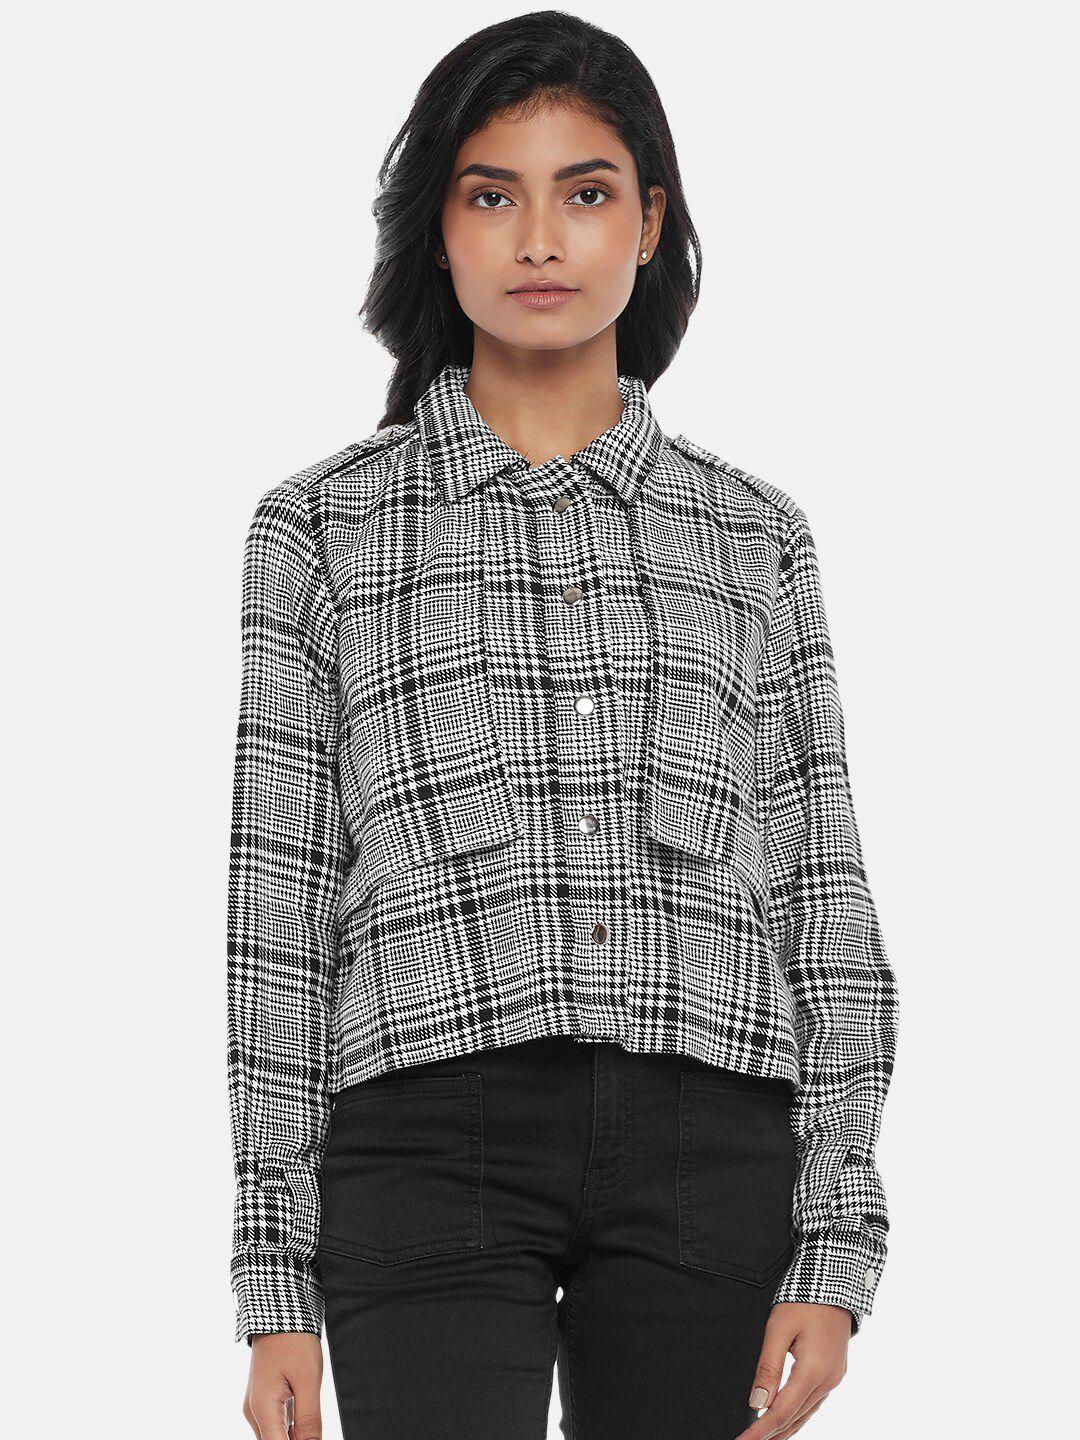 sf jeans by pantaloons women white & black checked crop casual shirt